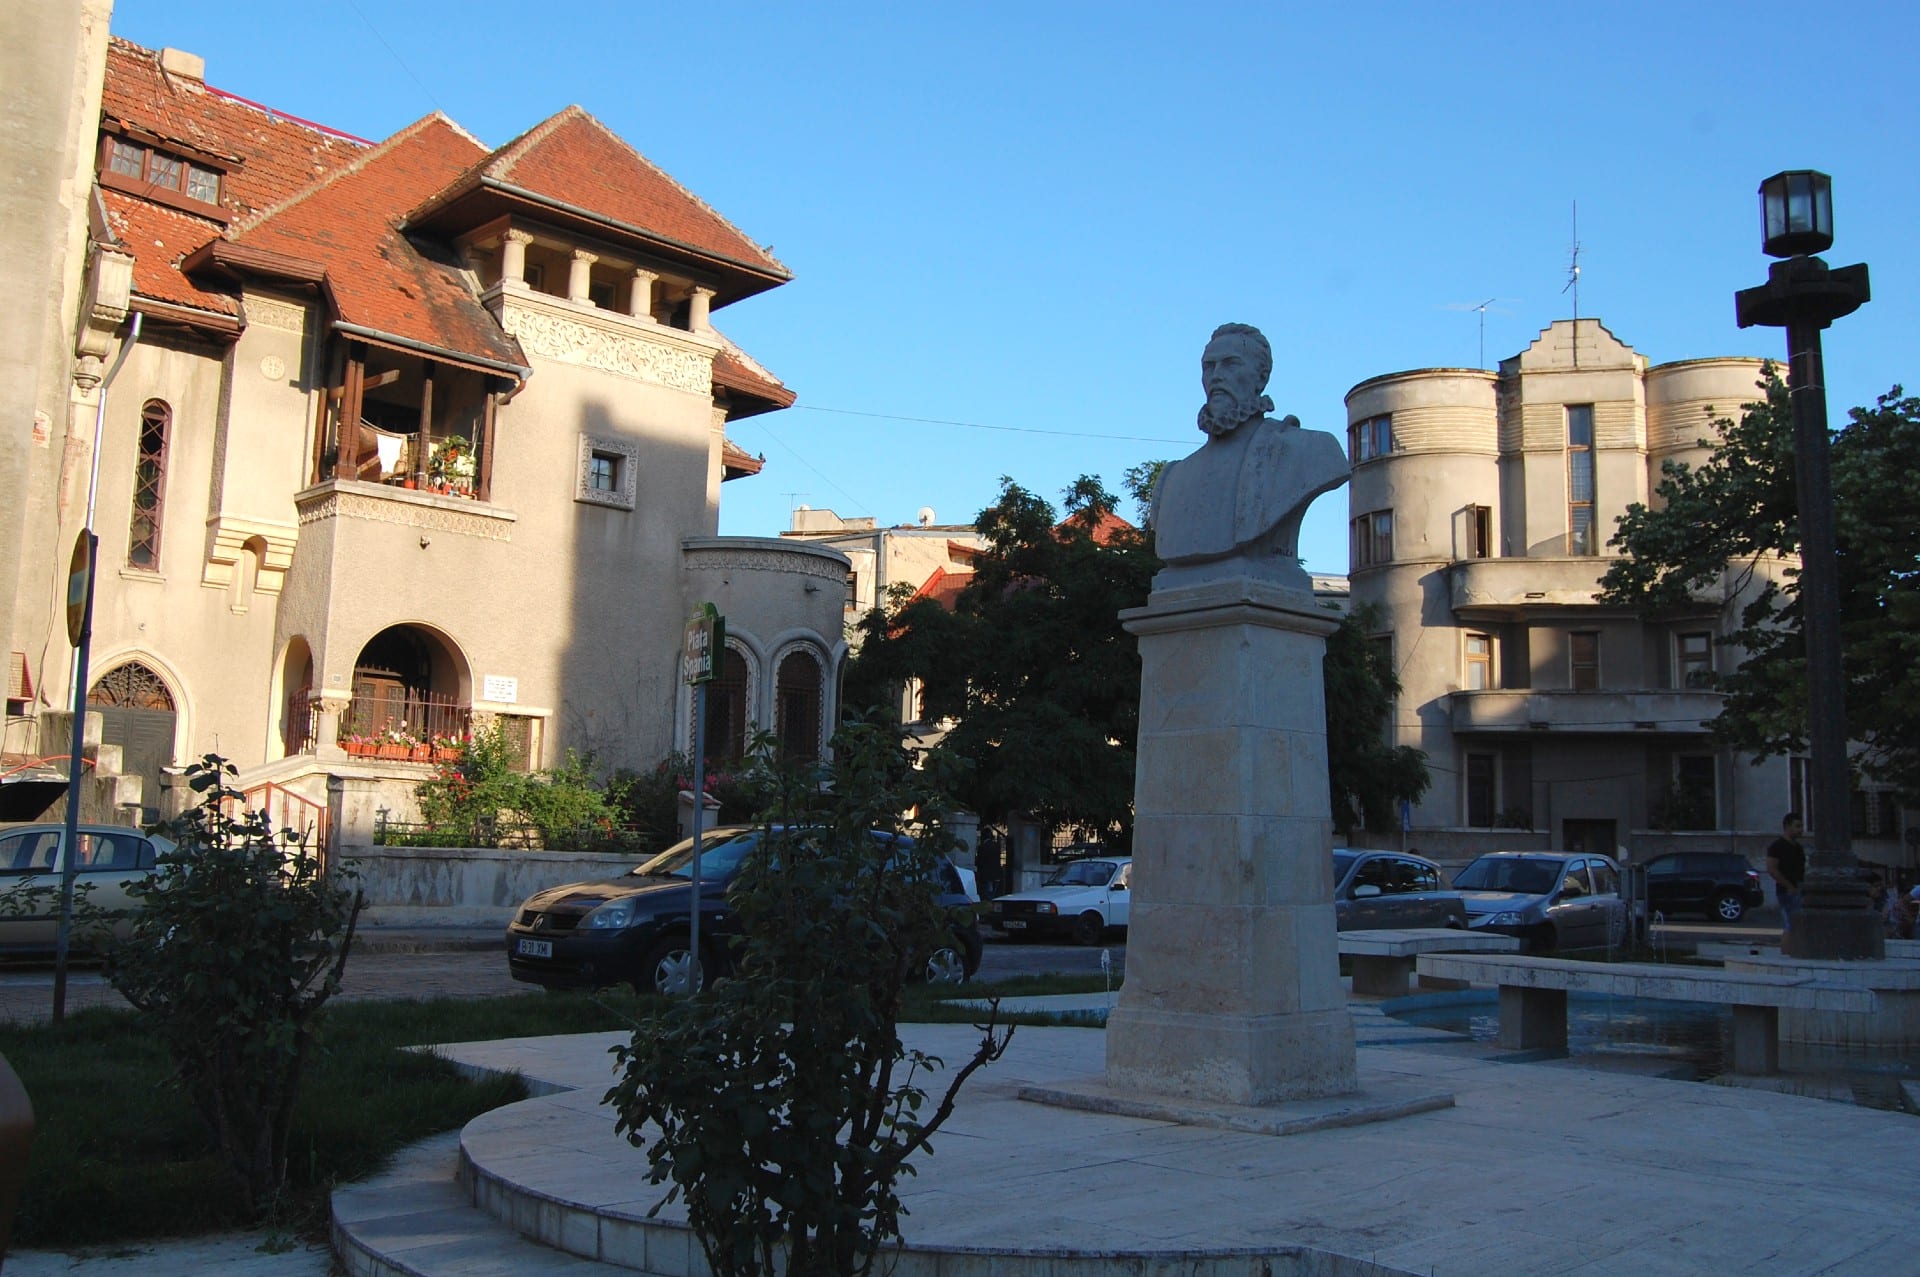 Located east of Piata Romana, Sector 2 is home to shady squares and boulevards filled with character